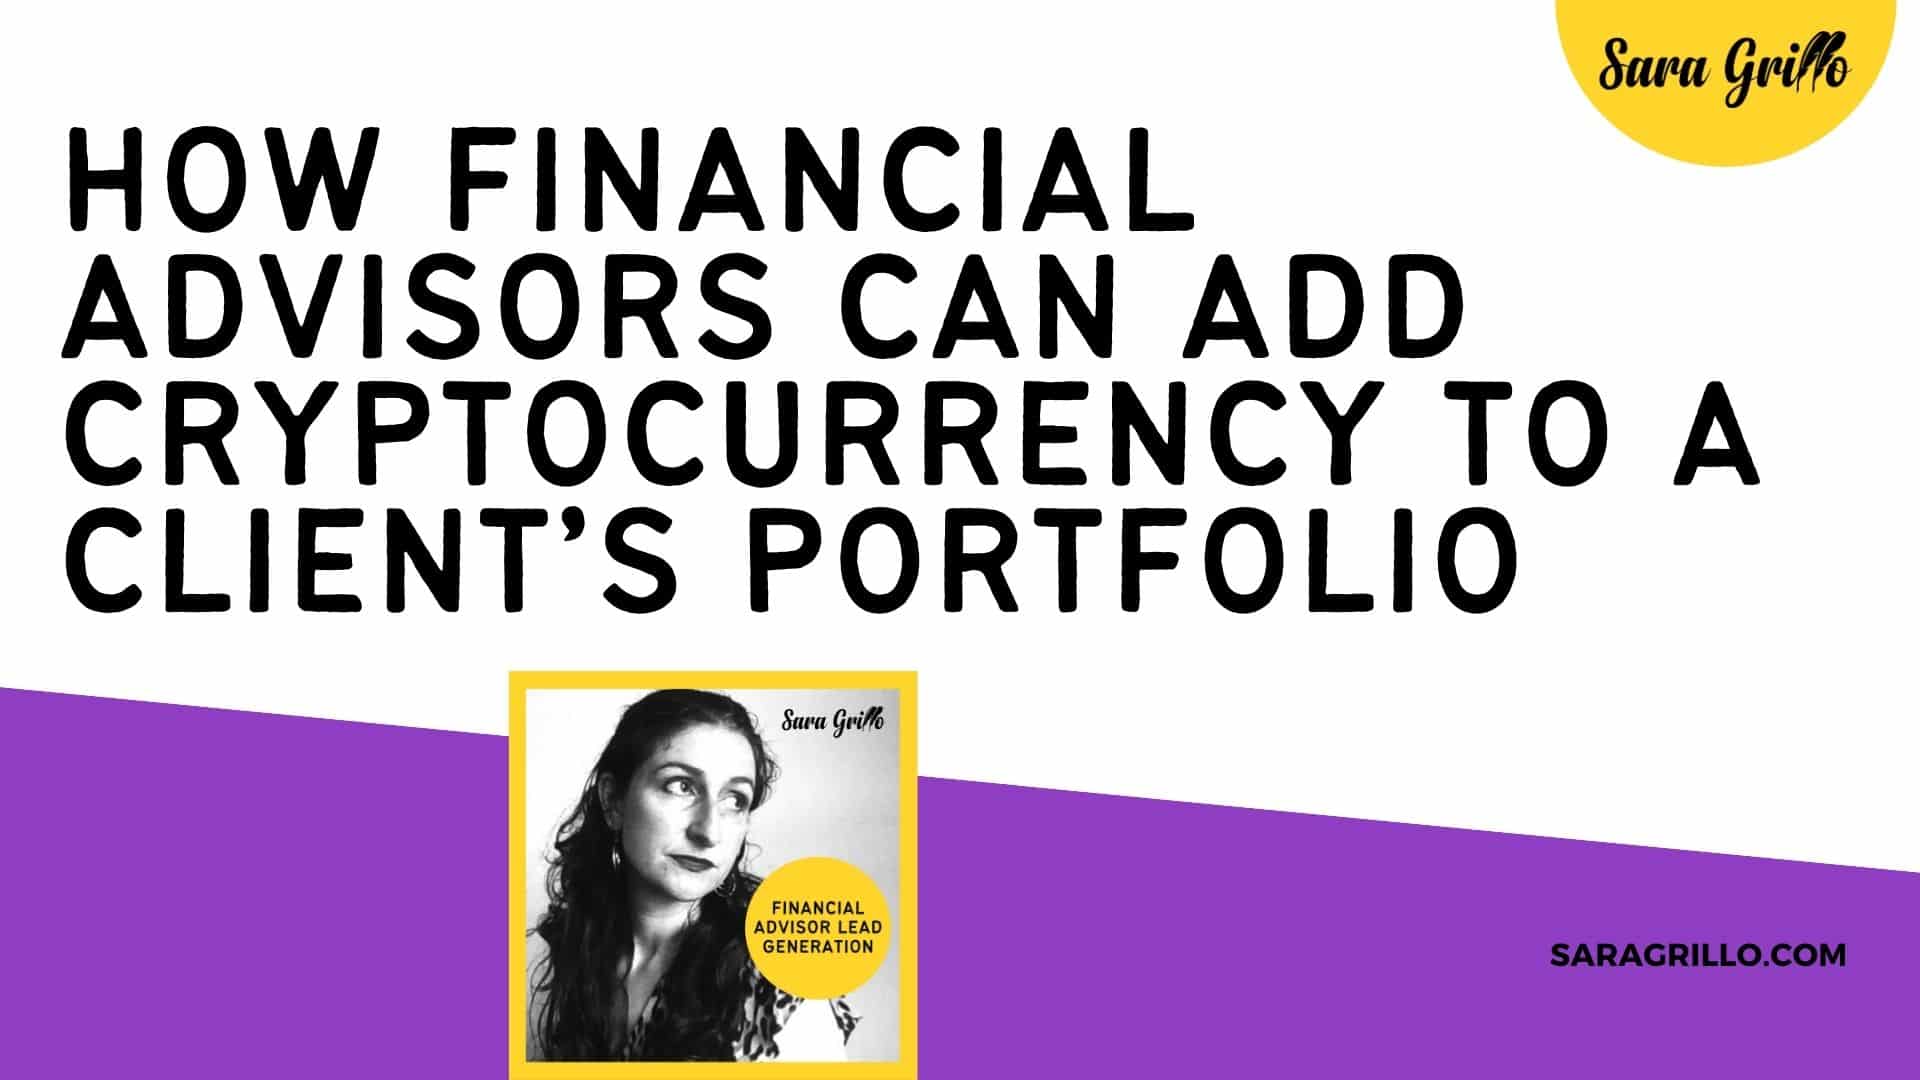 This blog talks about how financial advisors can add cryptocurrency to a client's portfolio, the risk factors to watch for when investing in crypto for clients, etc.